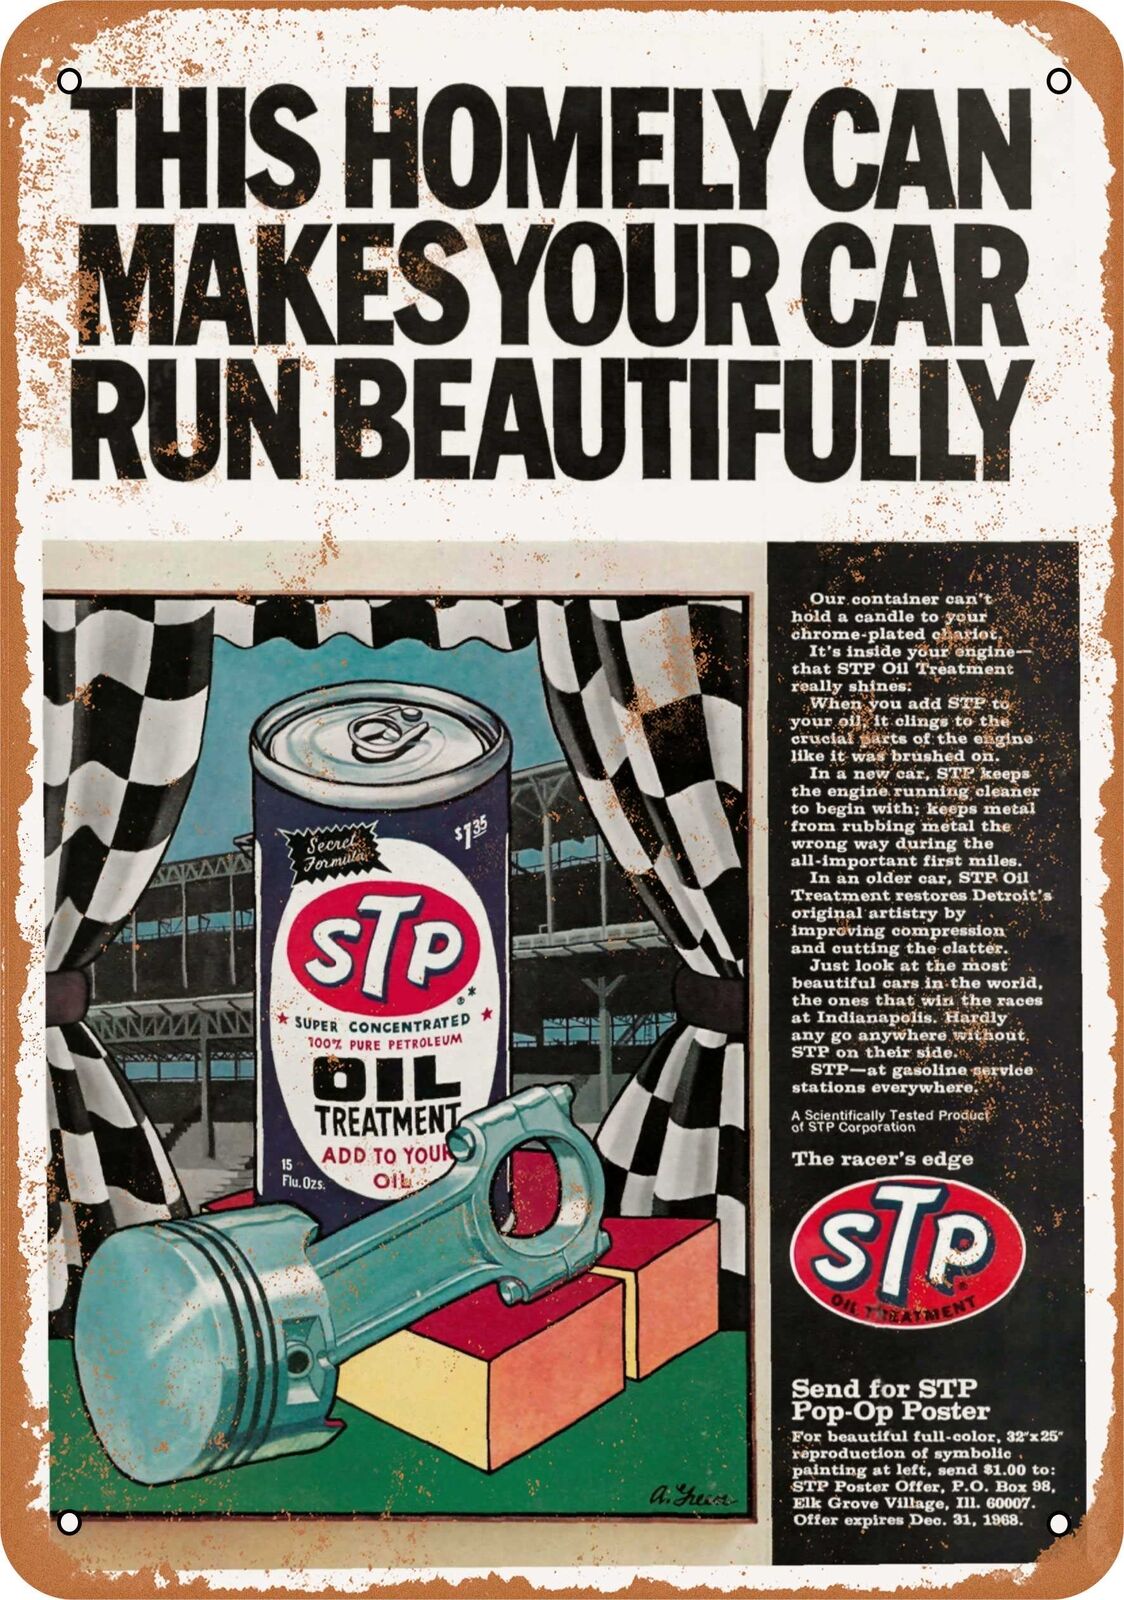 Metal Sign - 1968 STP Oil Treatment - Vintage Look Reproduction